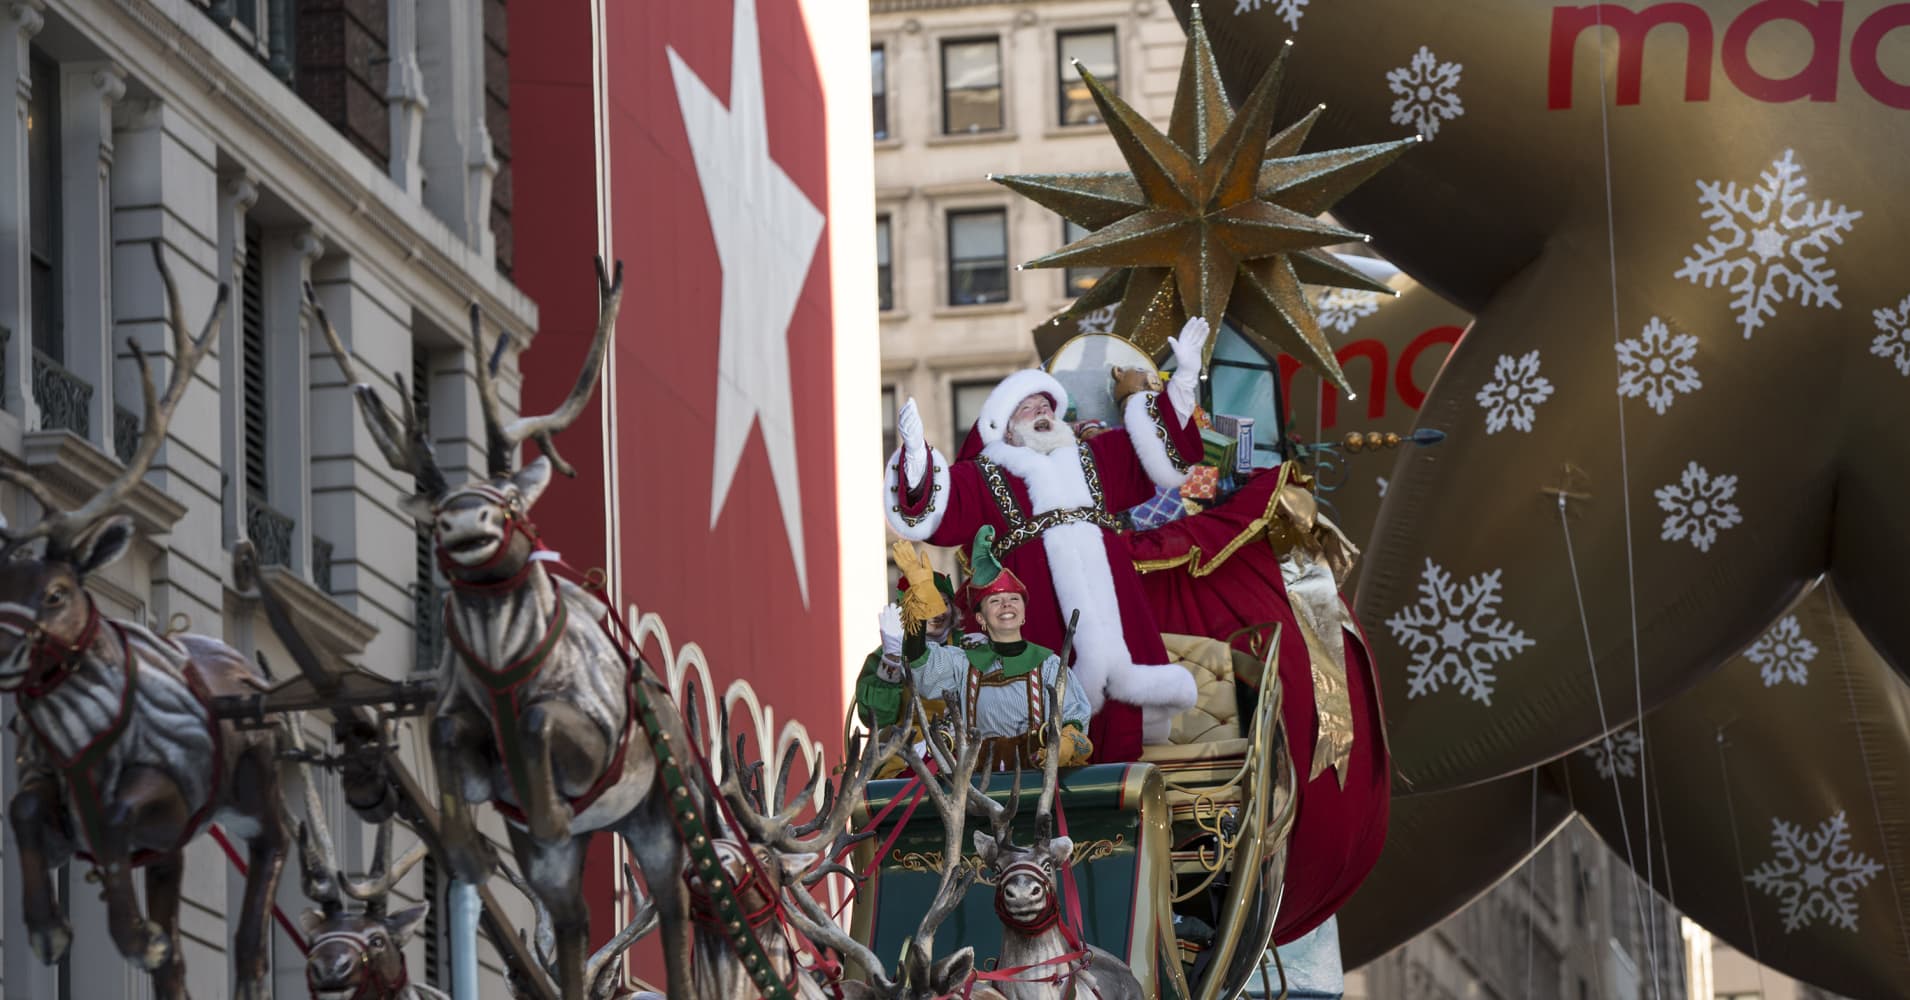 The holiday season gives Macy's the chance to prove its turnaround plan is working